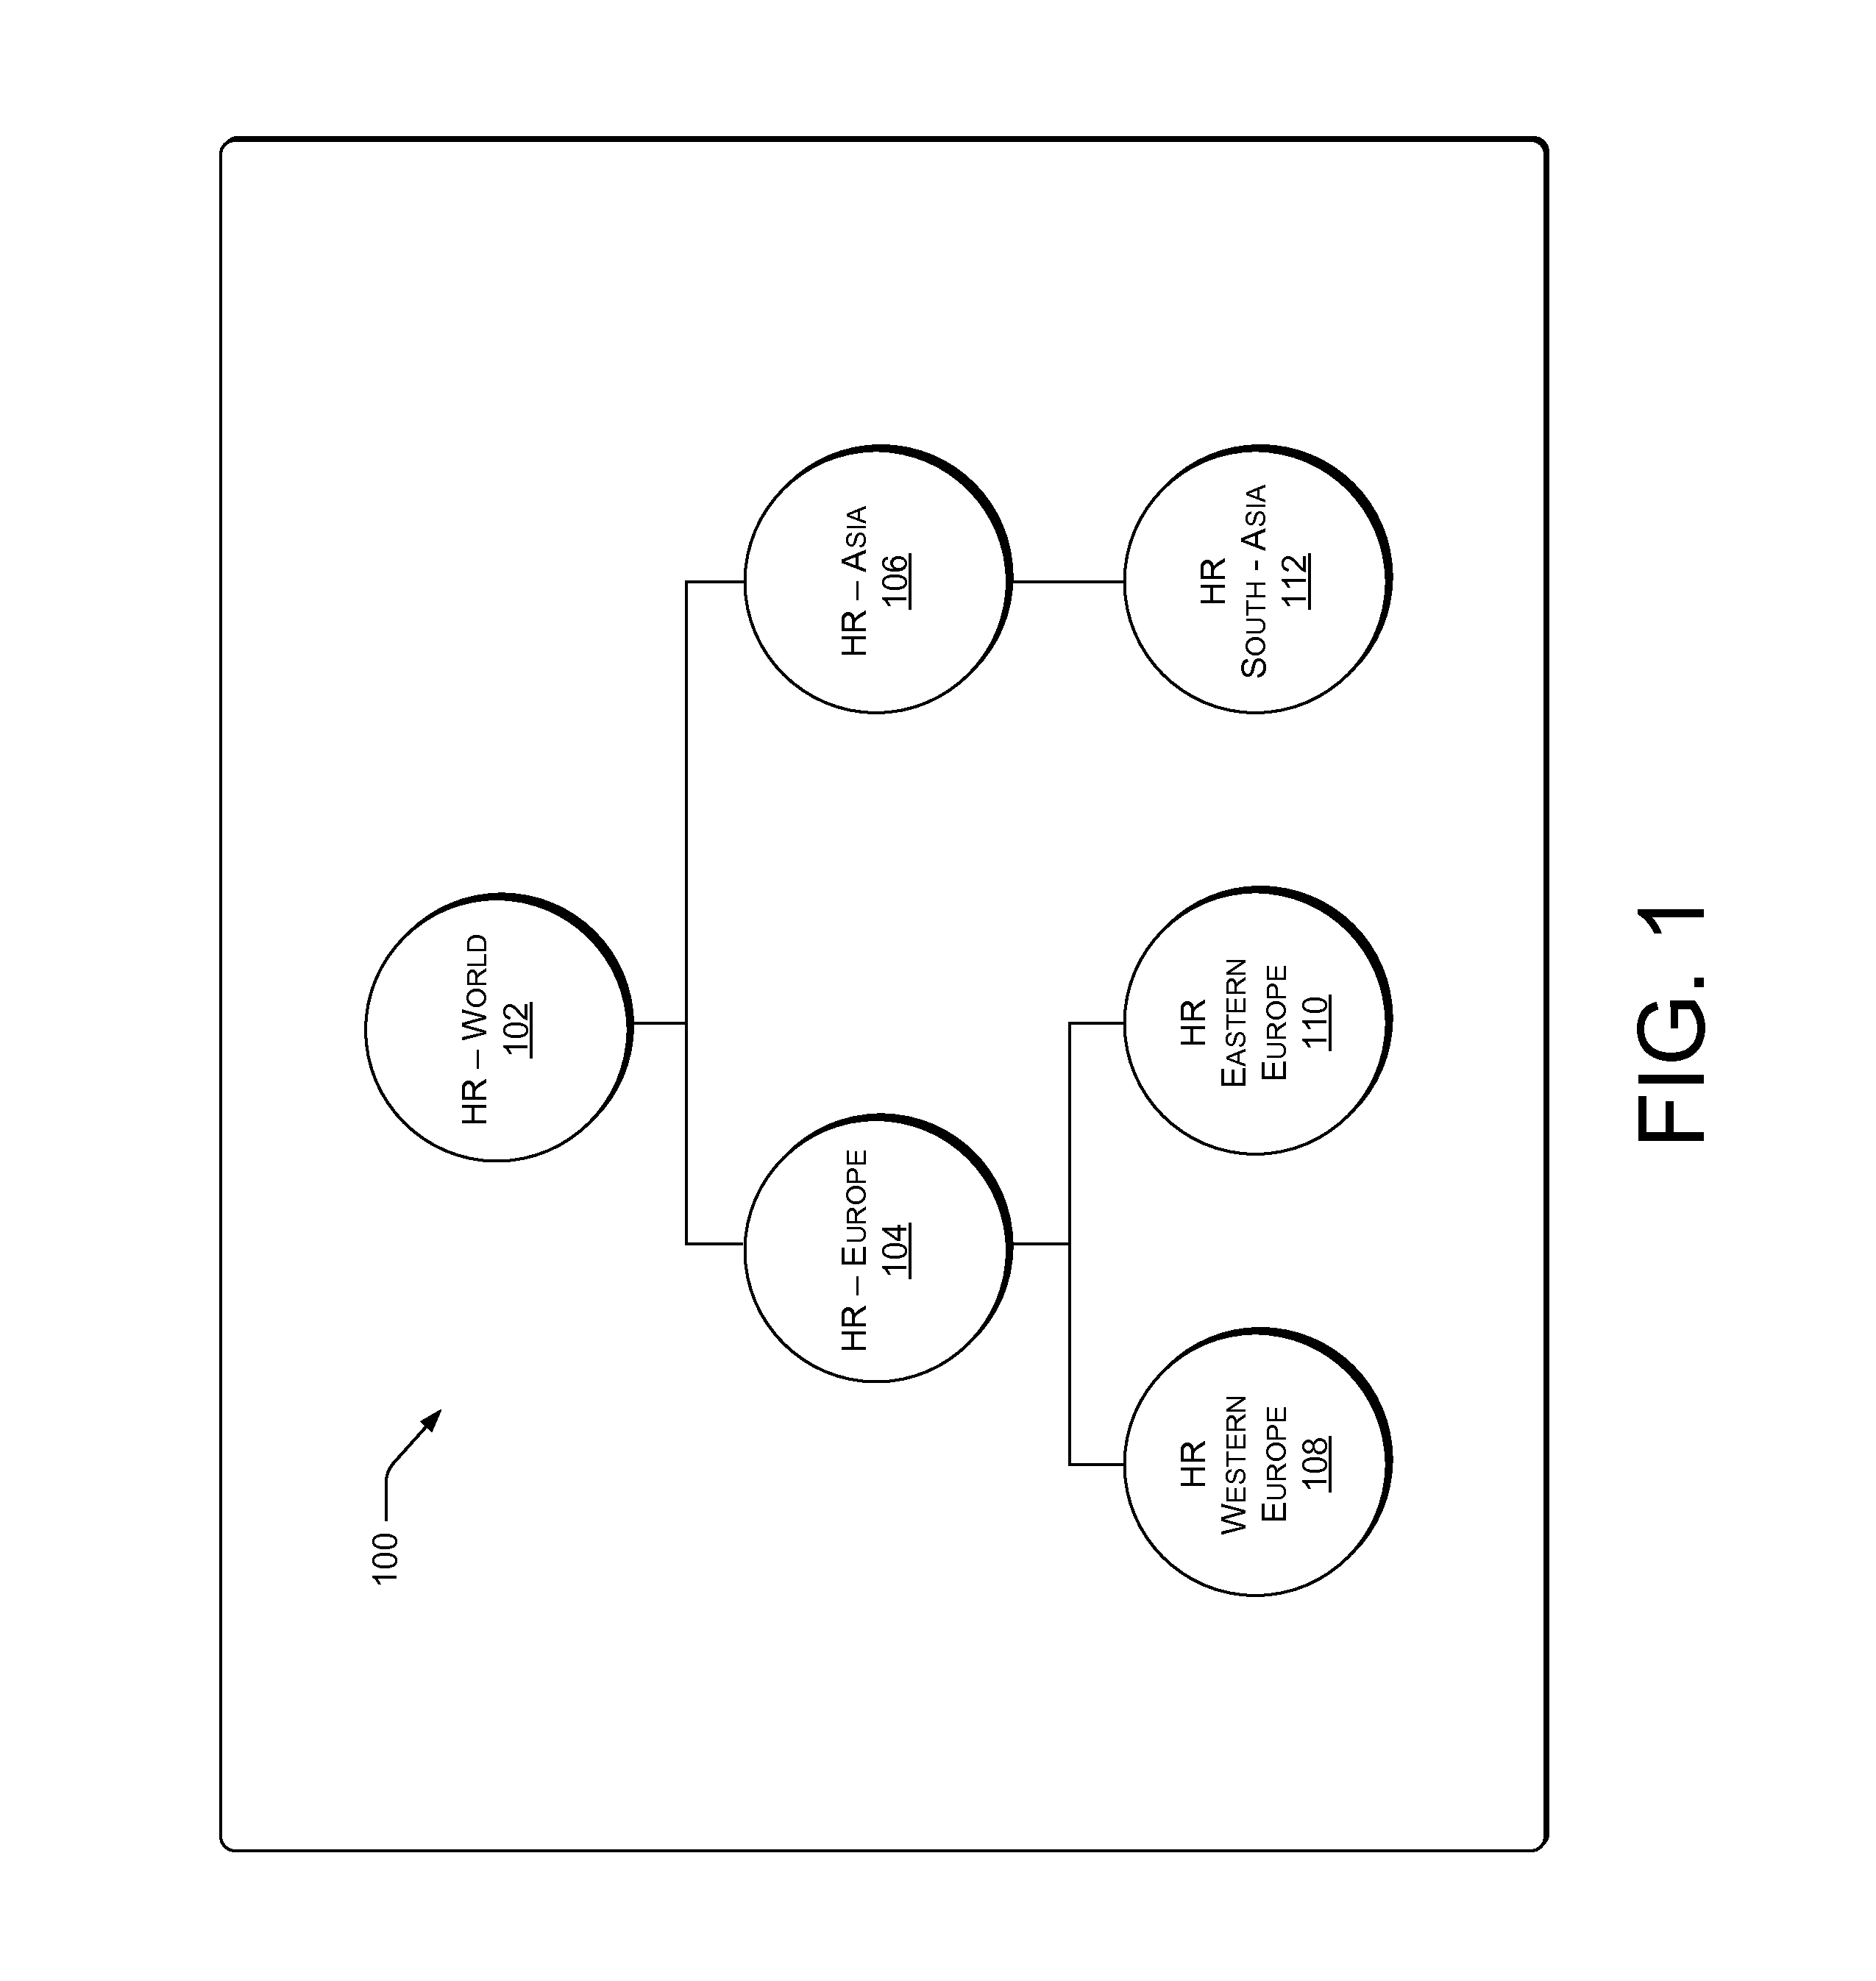 Method and system for managing and securing subsets of data in a large distributed data store